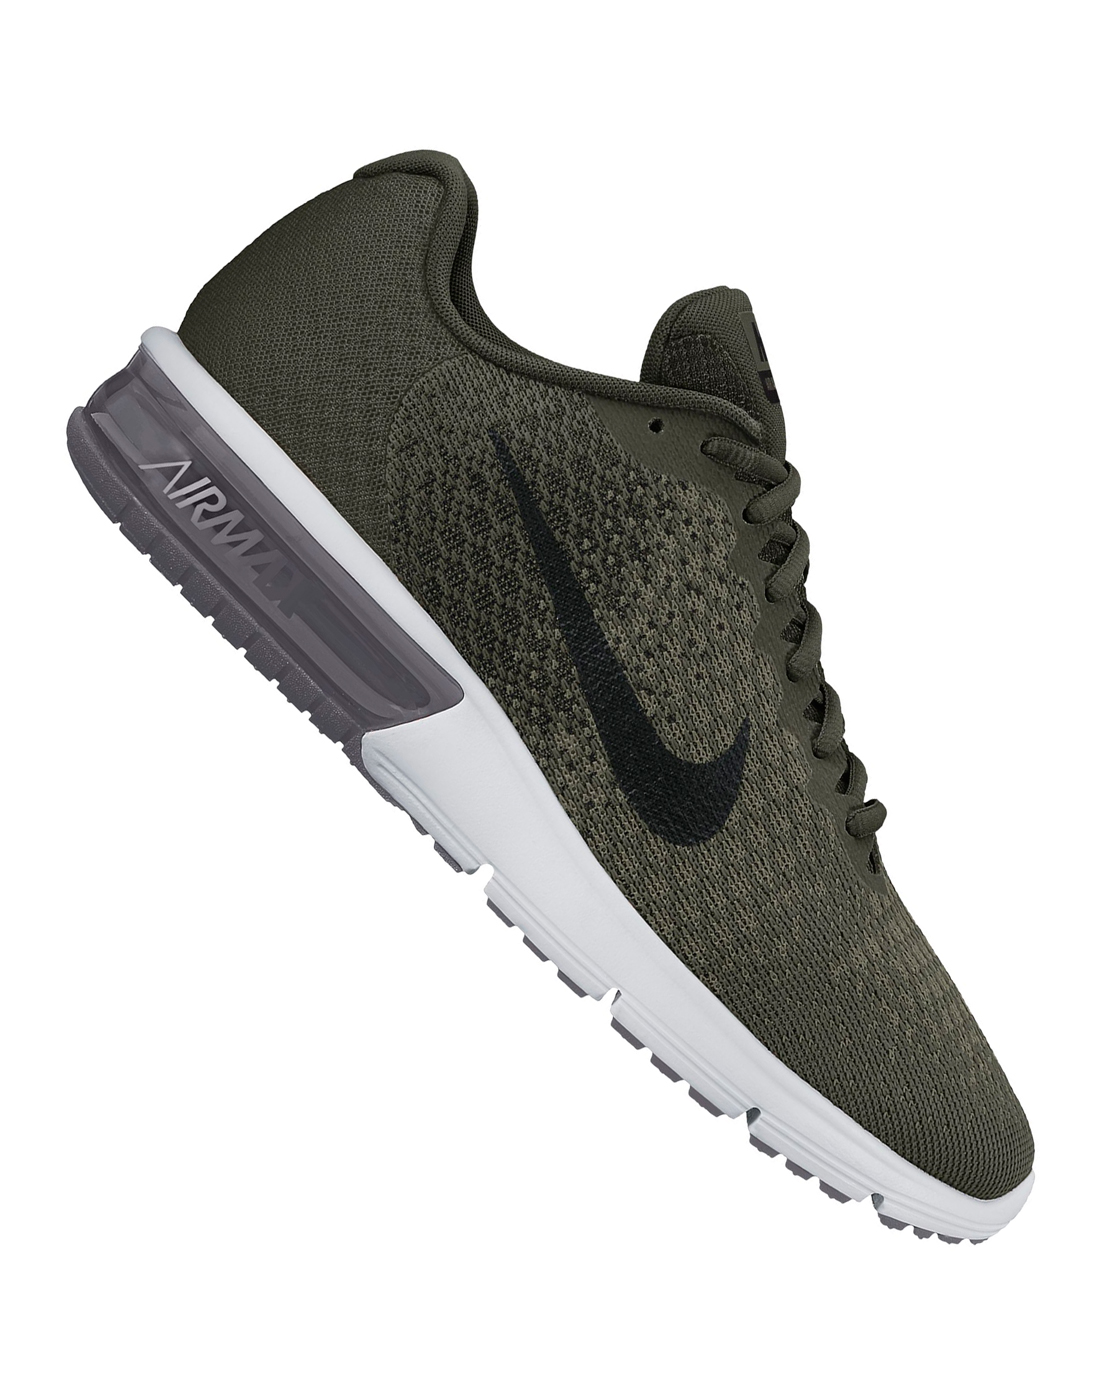 air max sequent 2 running shoe